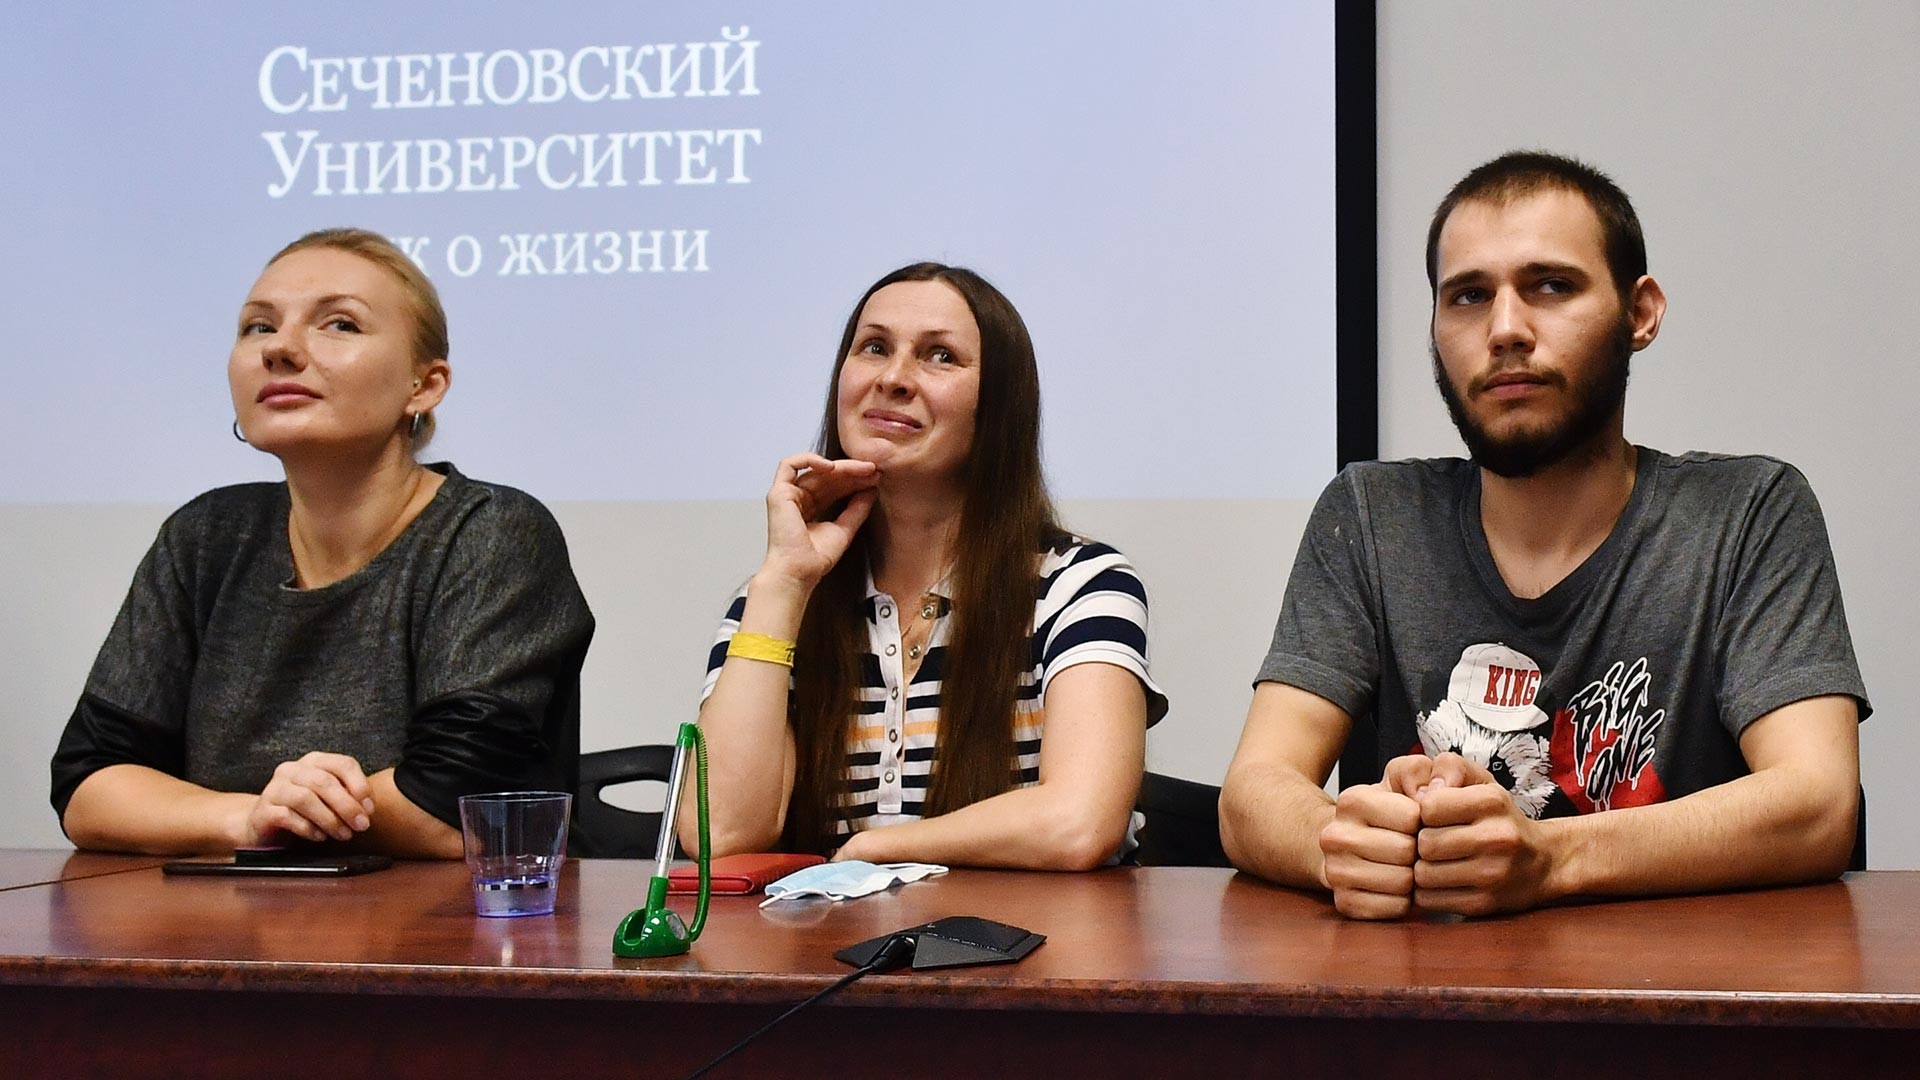 Three subjects of the research were present at the press conference, two female and one male.